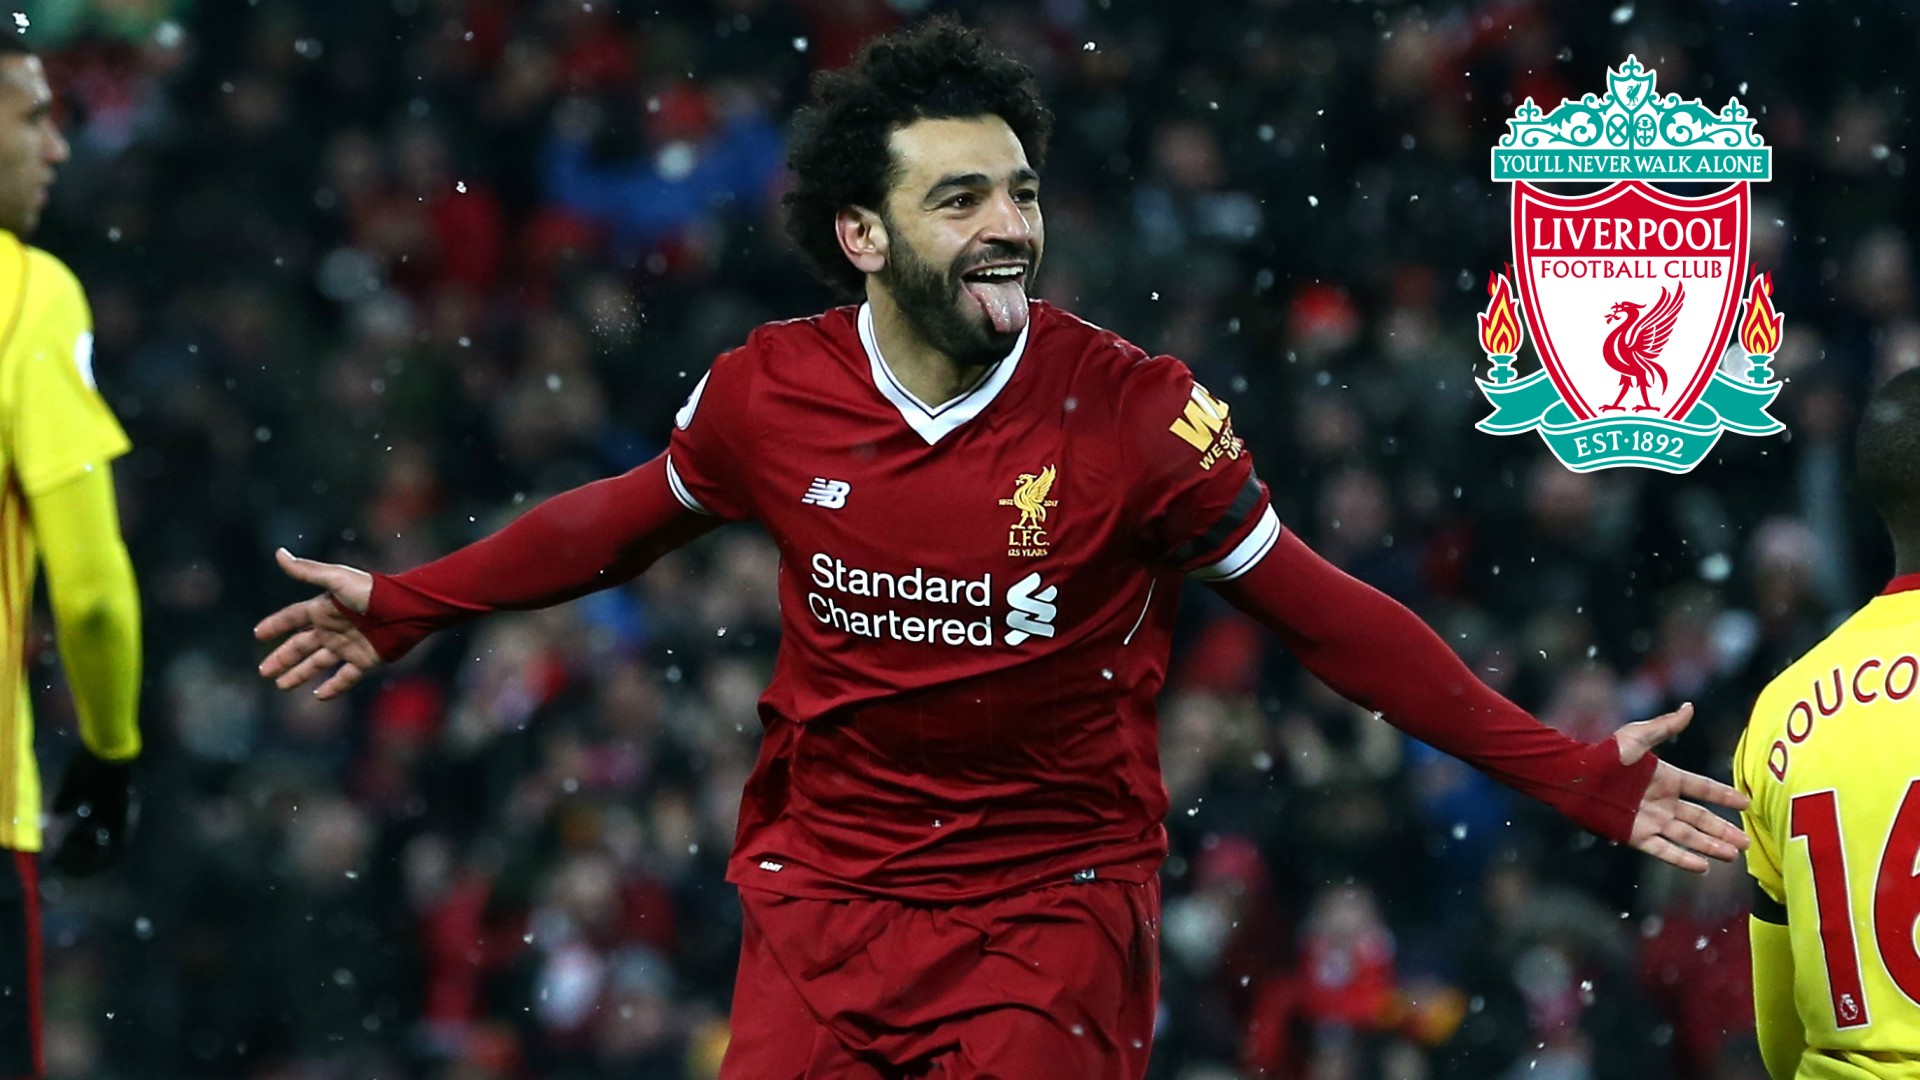 Wallpapers Computer Mohamed Salah With Resolution 1920X1080 pixel. You can make this wallpaper for your Desktop Computer Backgrounds, Mac Wallpapers, Android Lock screen or iPhone Screensavers